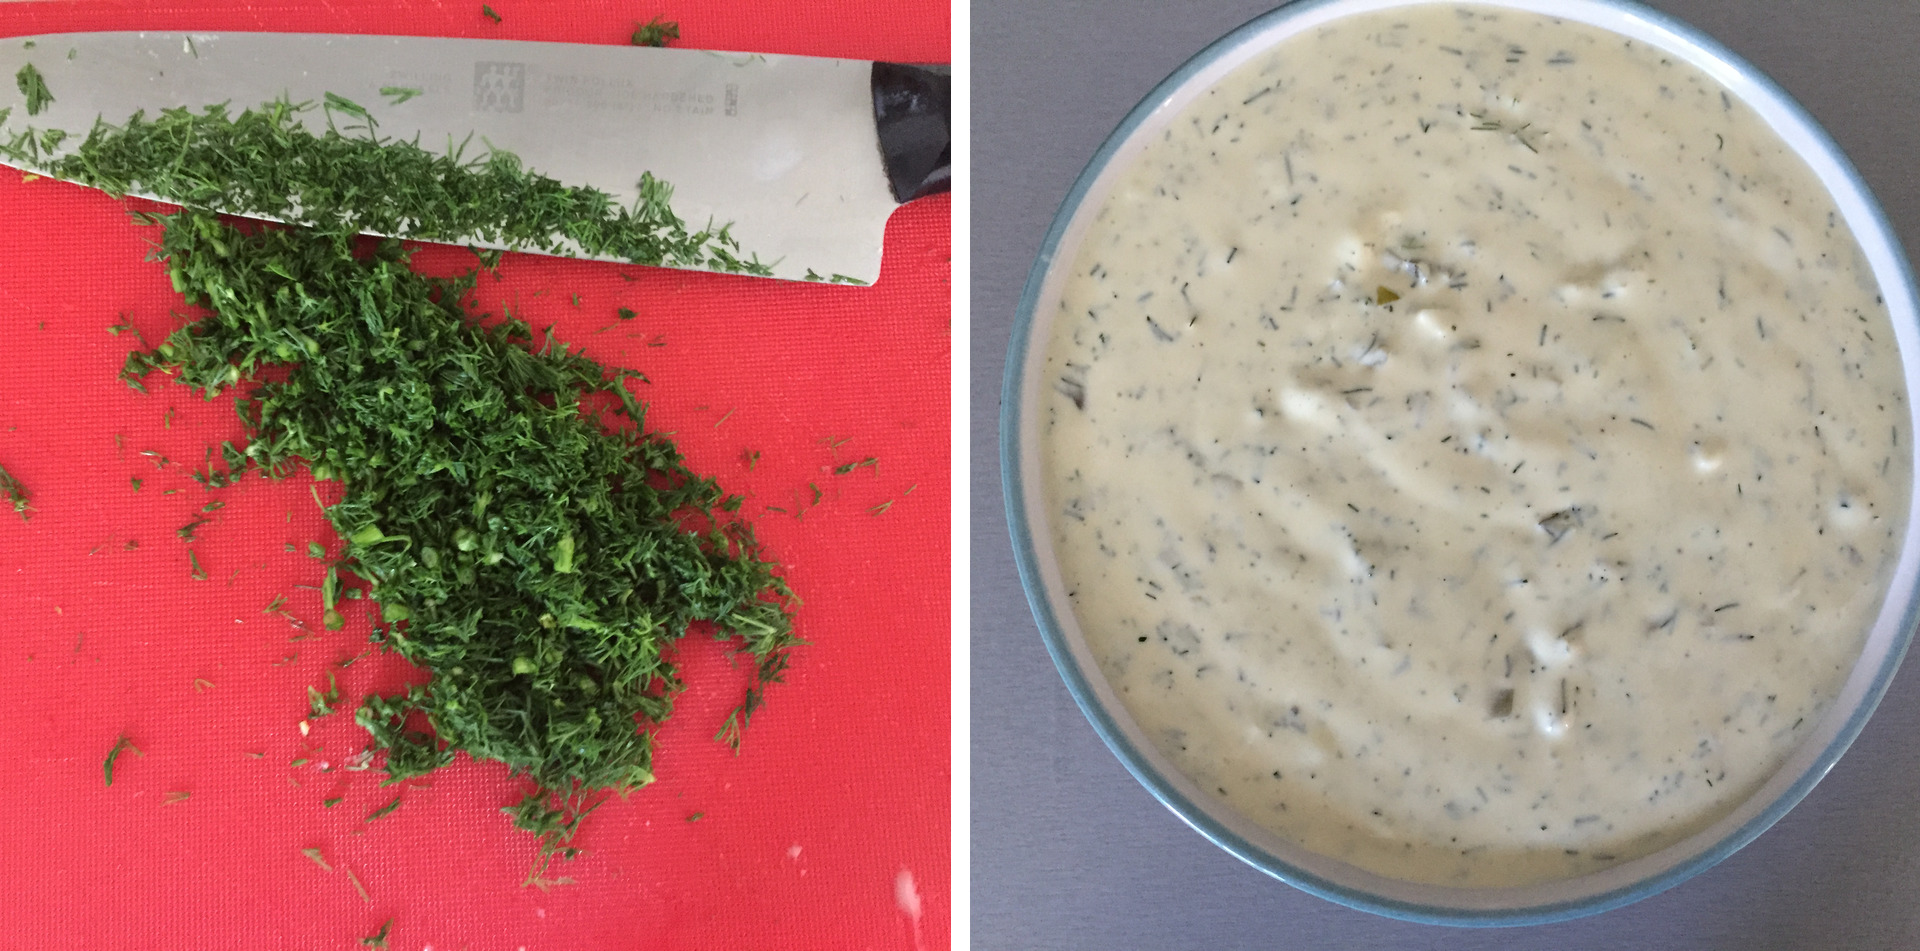 Finalizing the remoulade